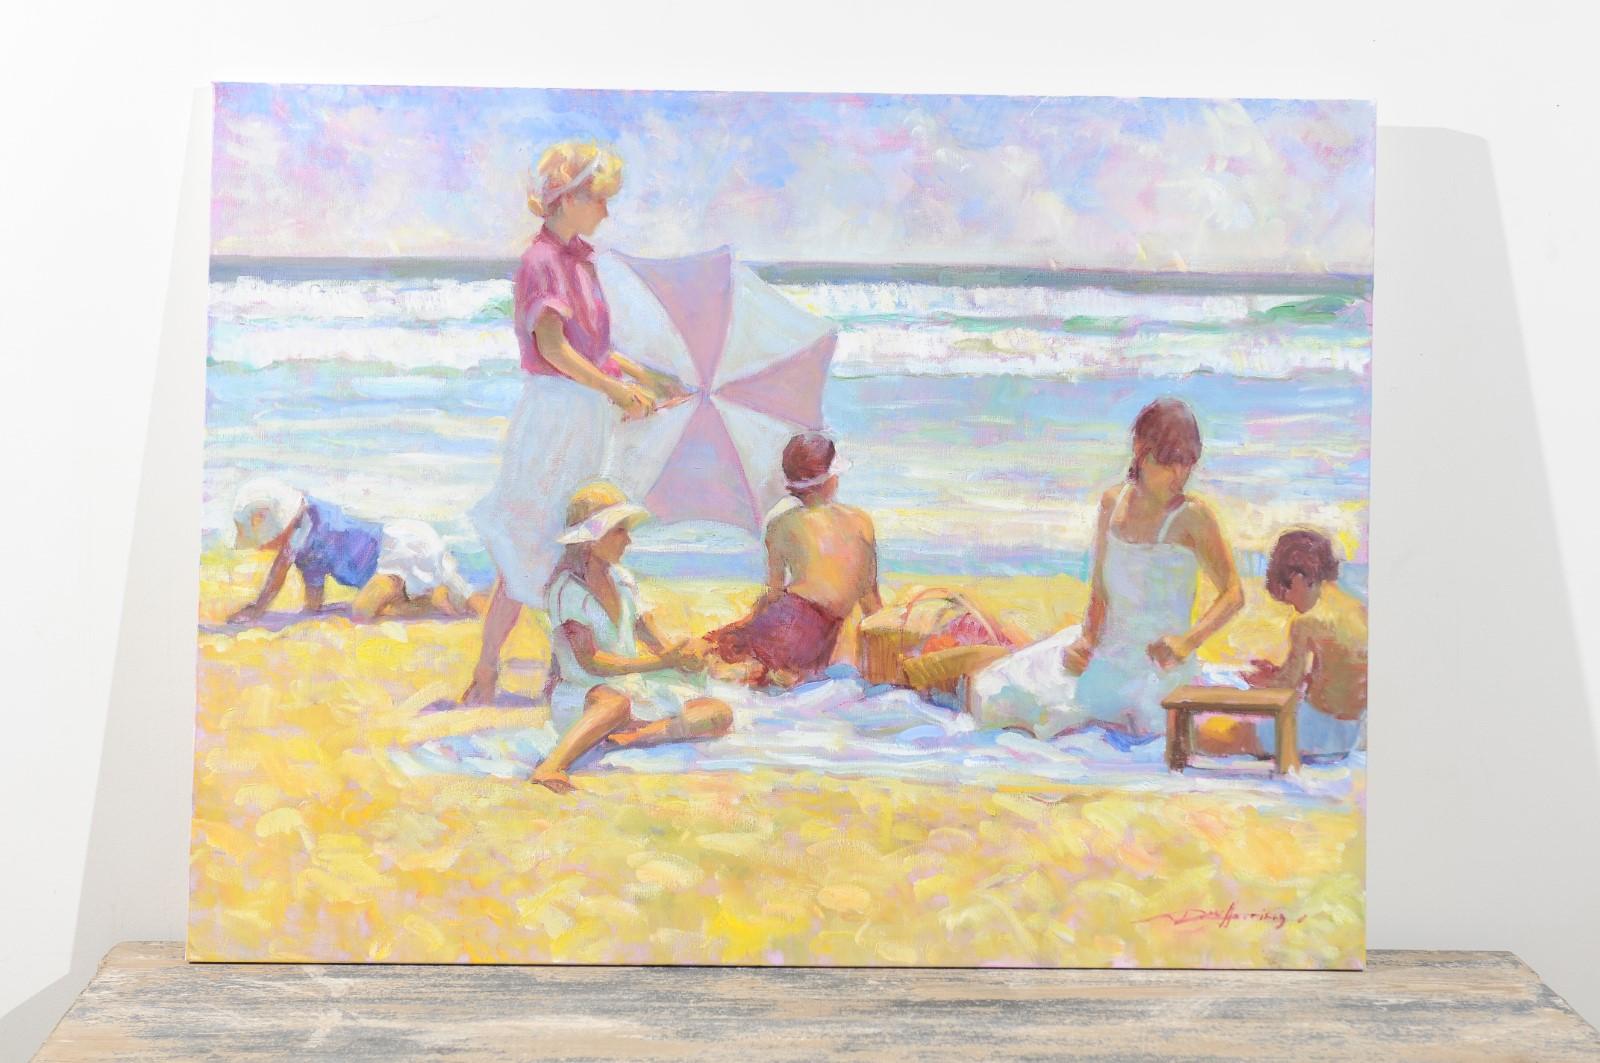 Summer Moment by Don Hatfield, Original Contemporary Beach Scene Oil Painting 6